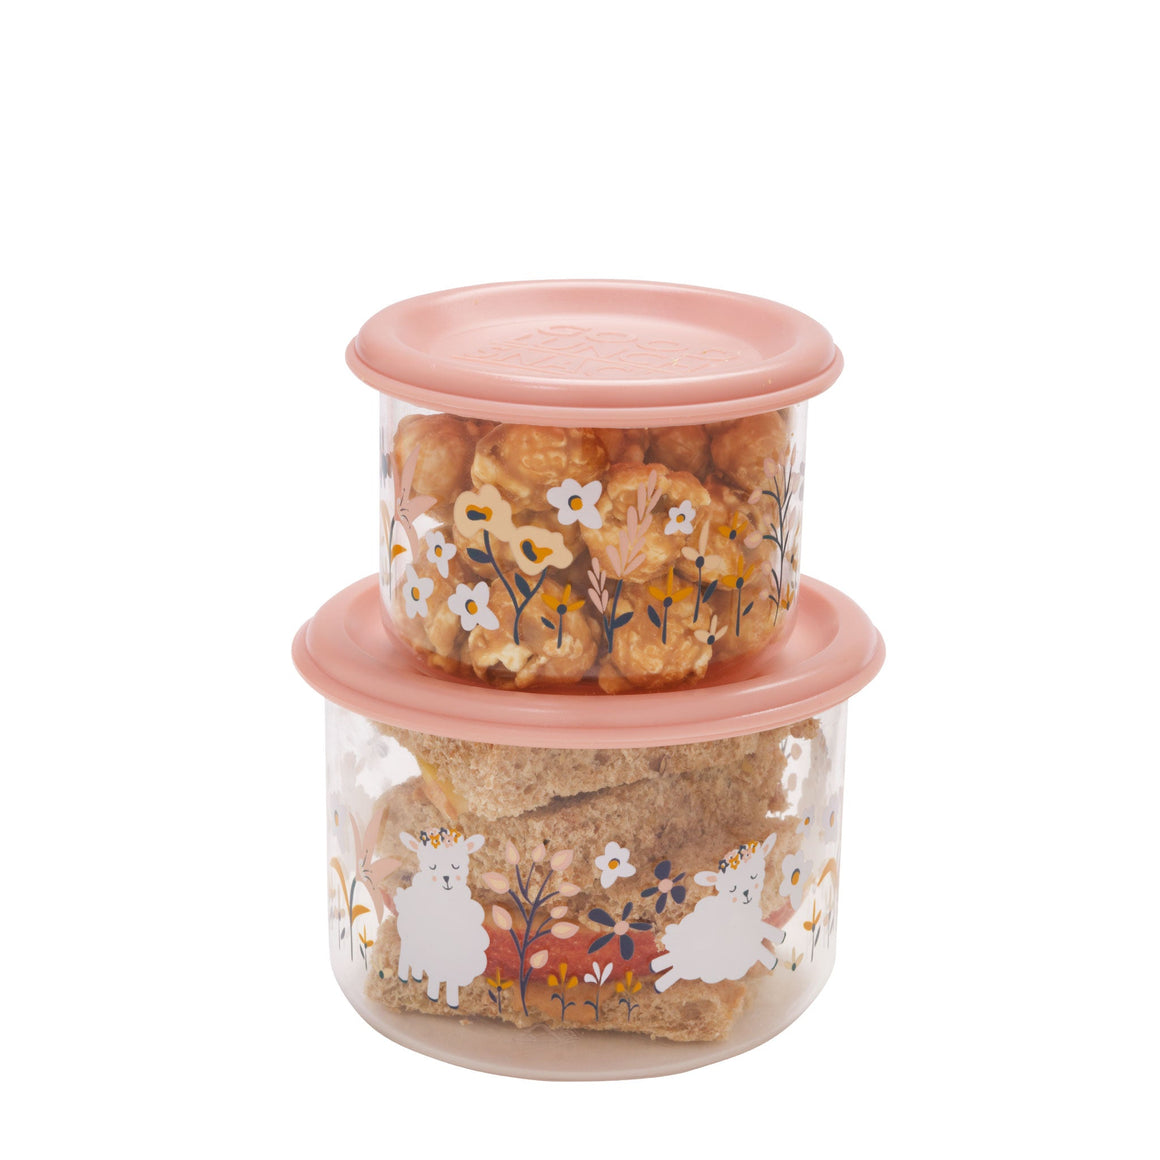 Lily The Lamb - Good Lunch Containers - Small 2 pcs.